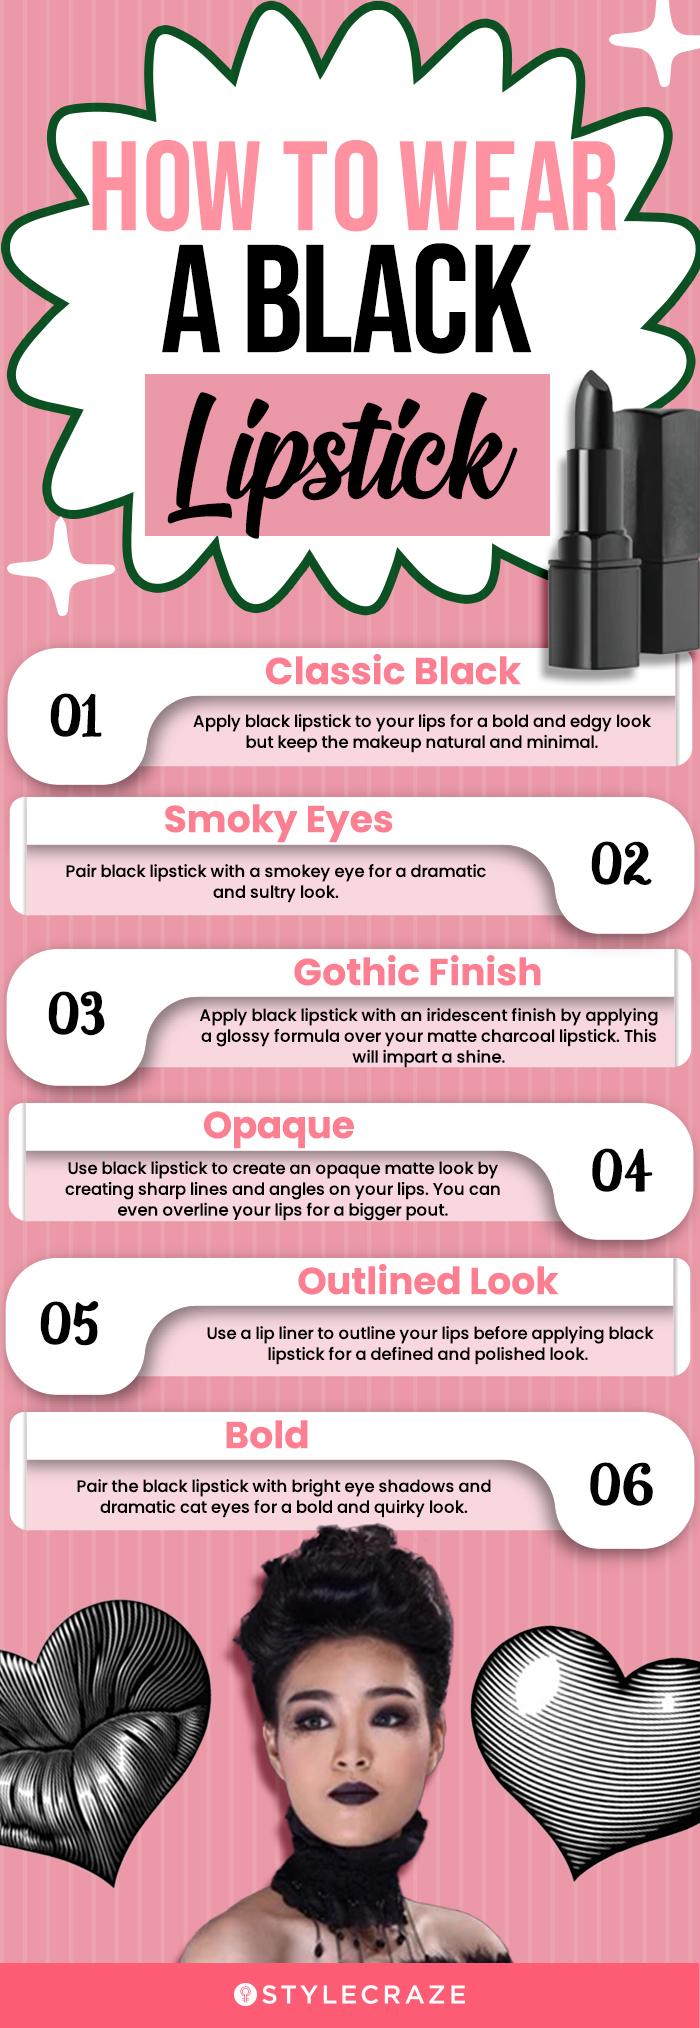 How To Wear Black Lipstick (infographic)